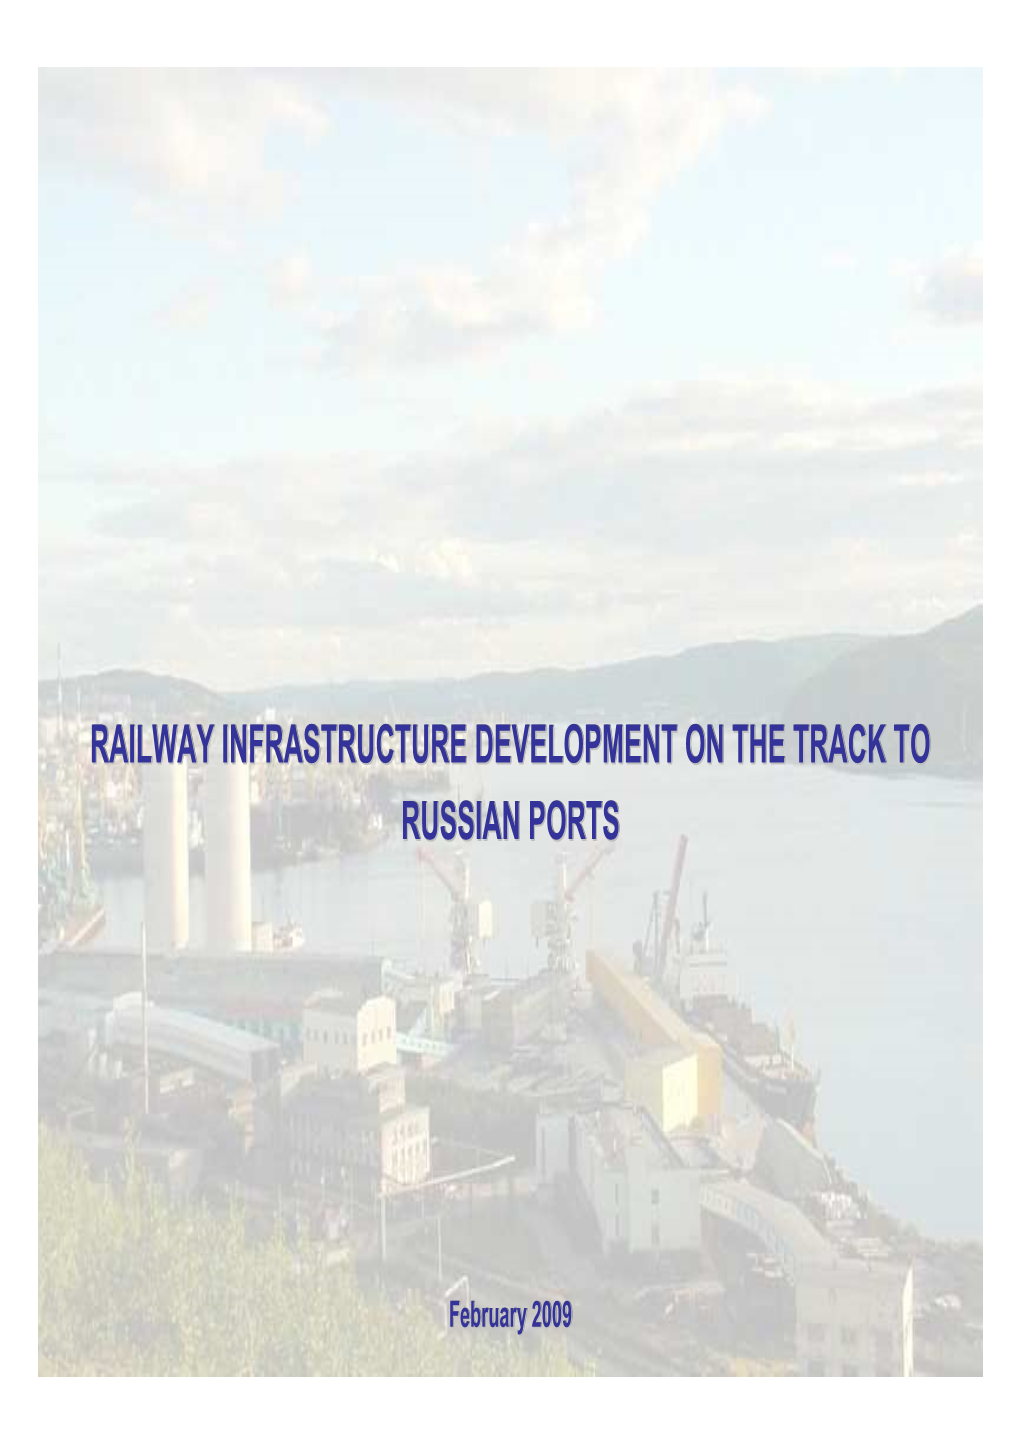 Steps of Railway Infrastructure Development on the Track to Ports of North-Western Region up to 2020